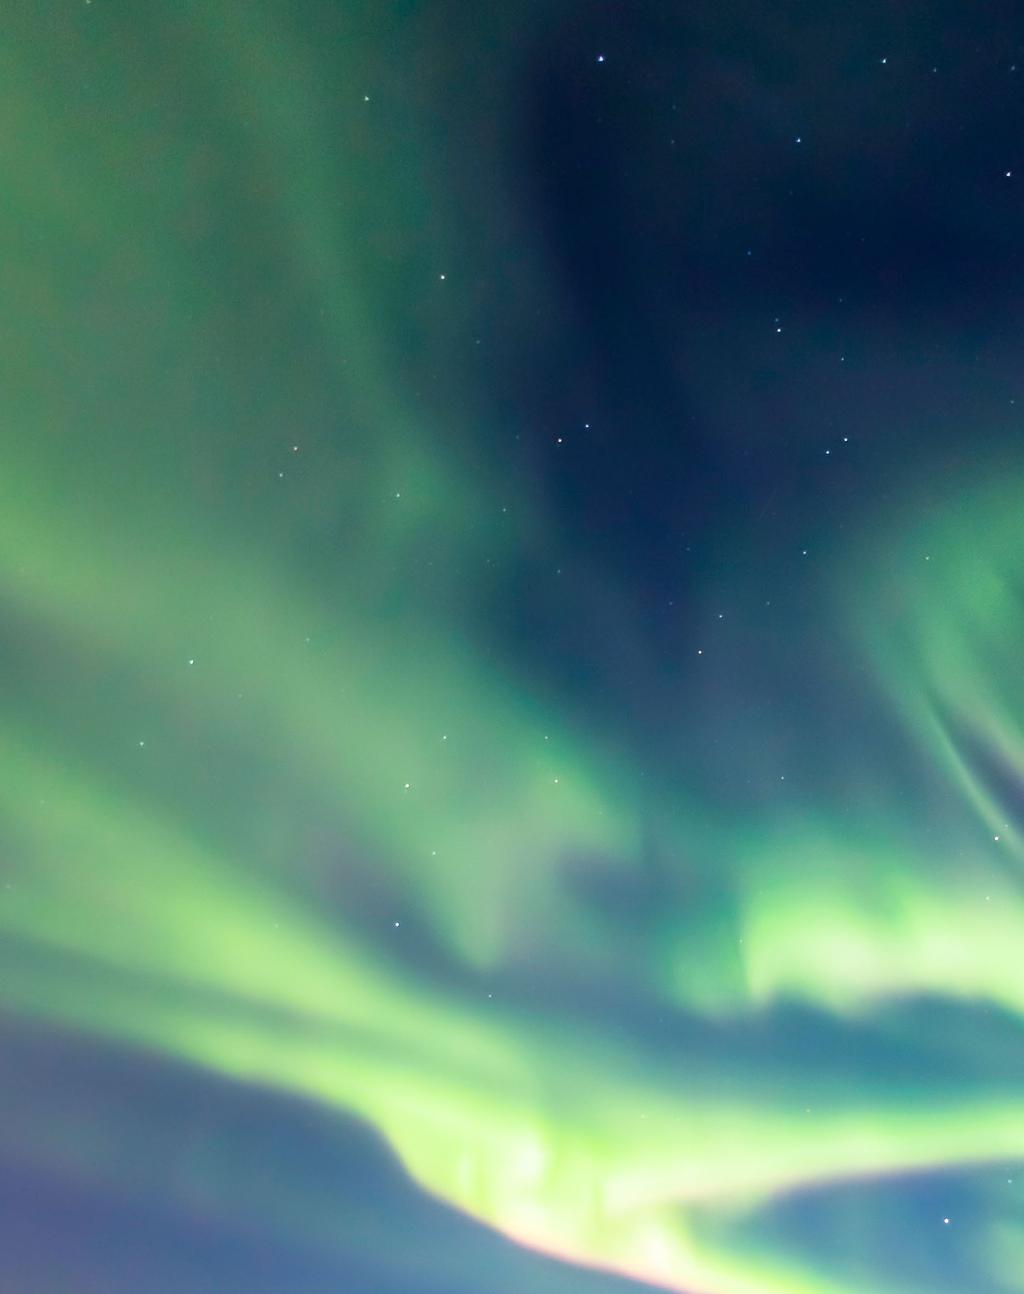 NORTHERN LIGHTS CAN BE SEEN BETWEEN LATE AUGUST UNTIL LATE APRIL.